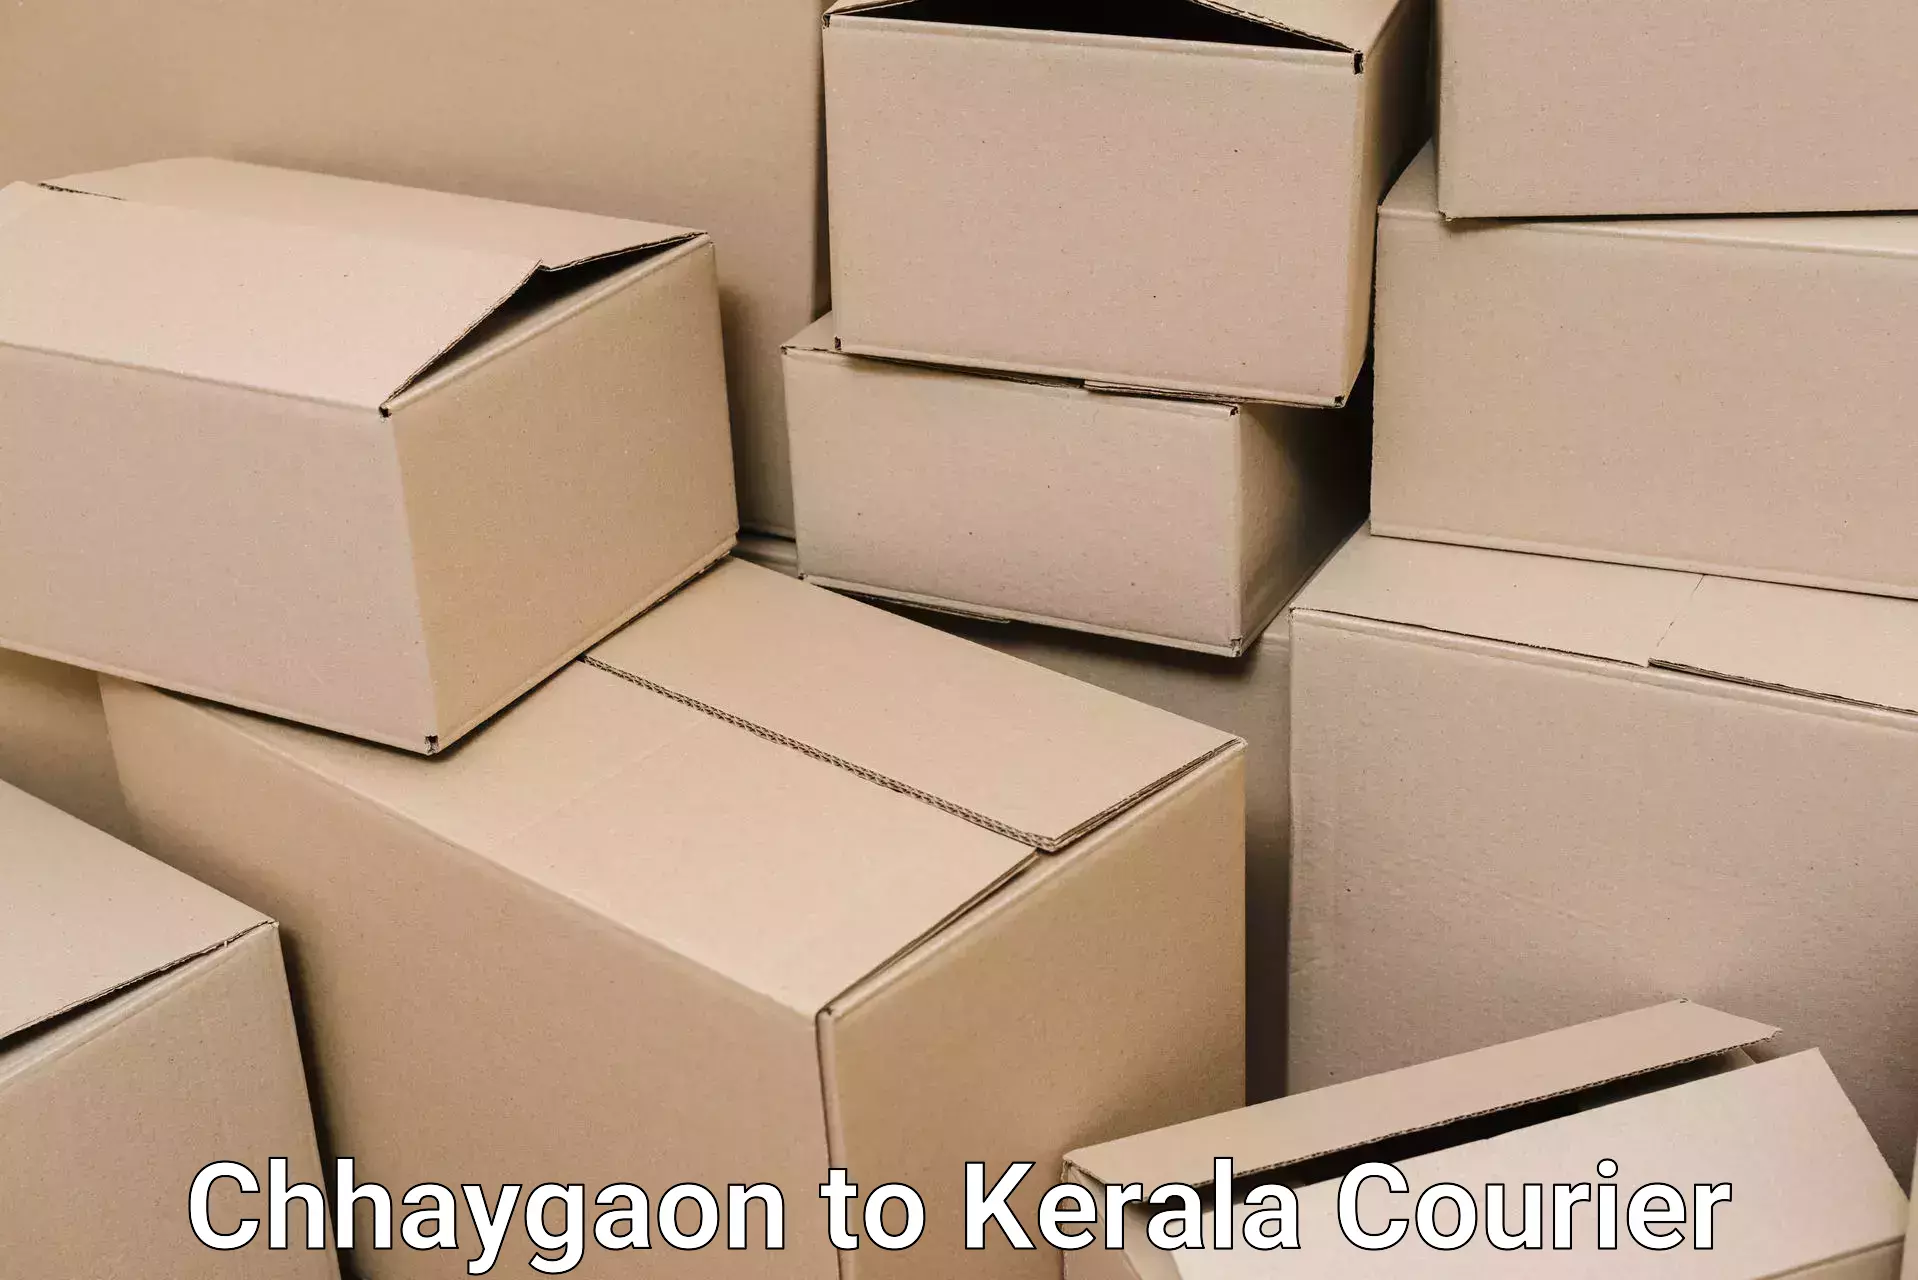 Trusted relocation experts Chhaygaon to Kakkur